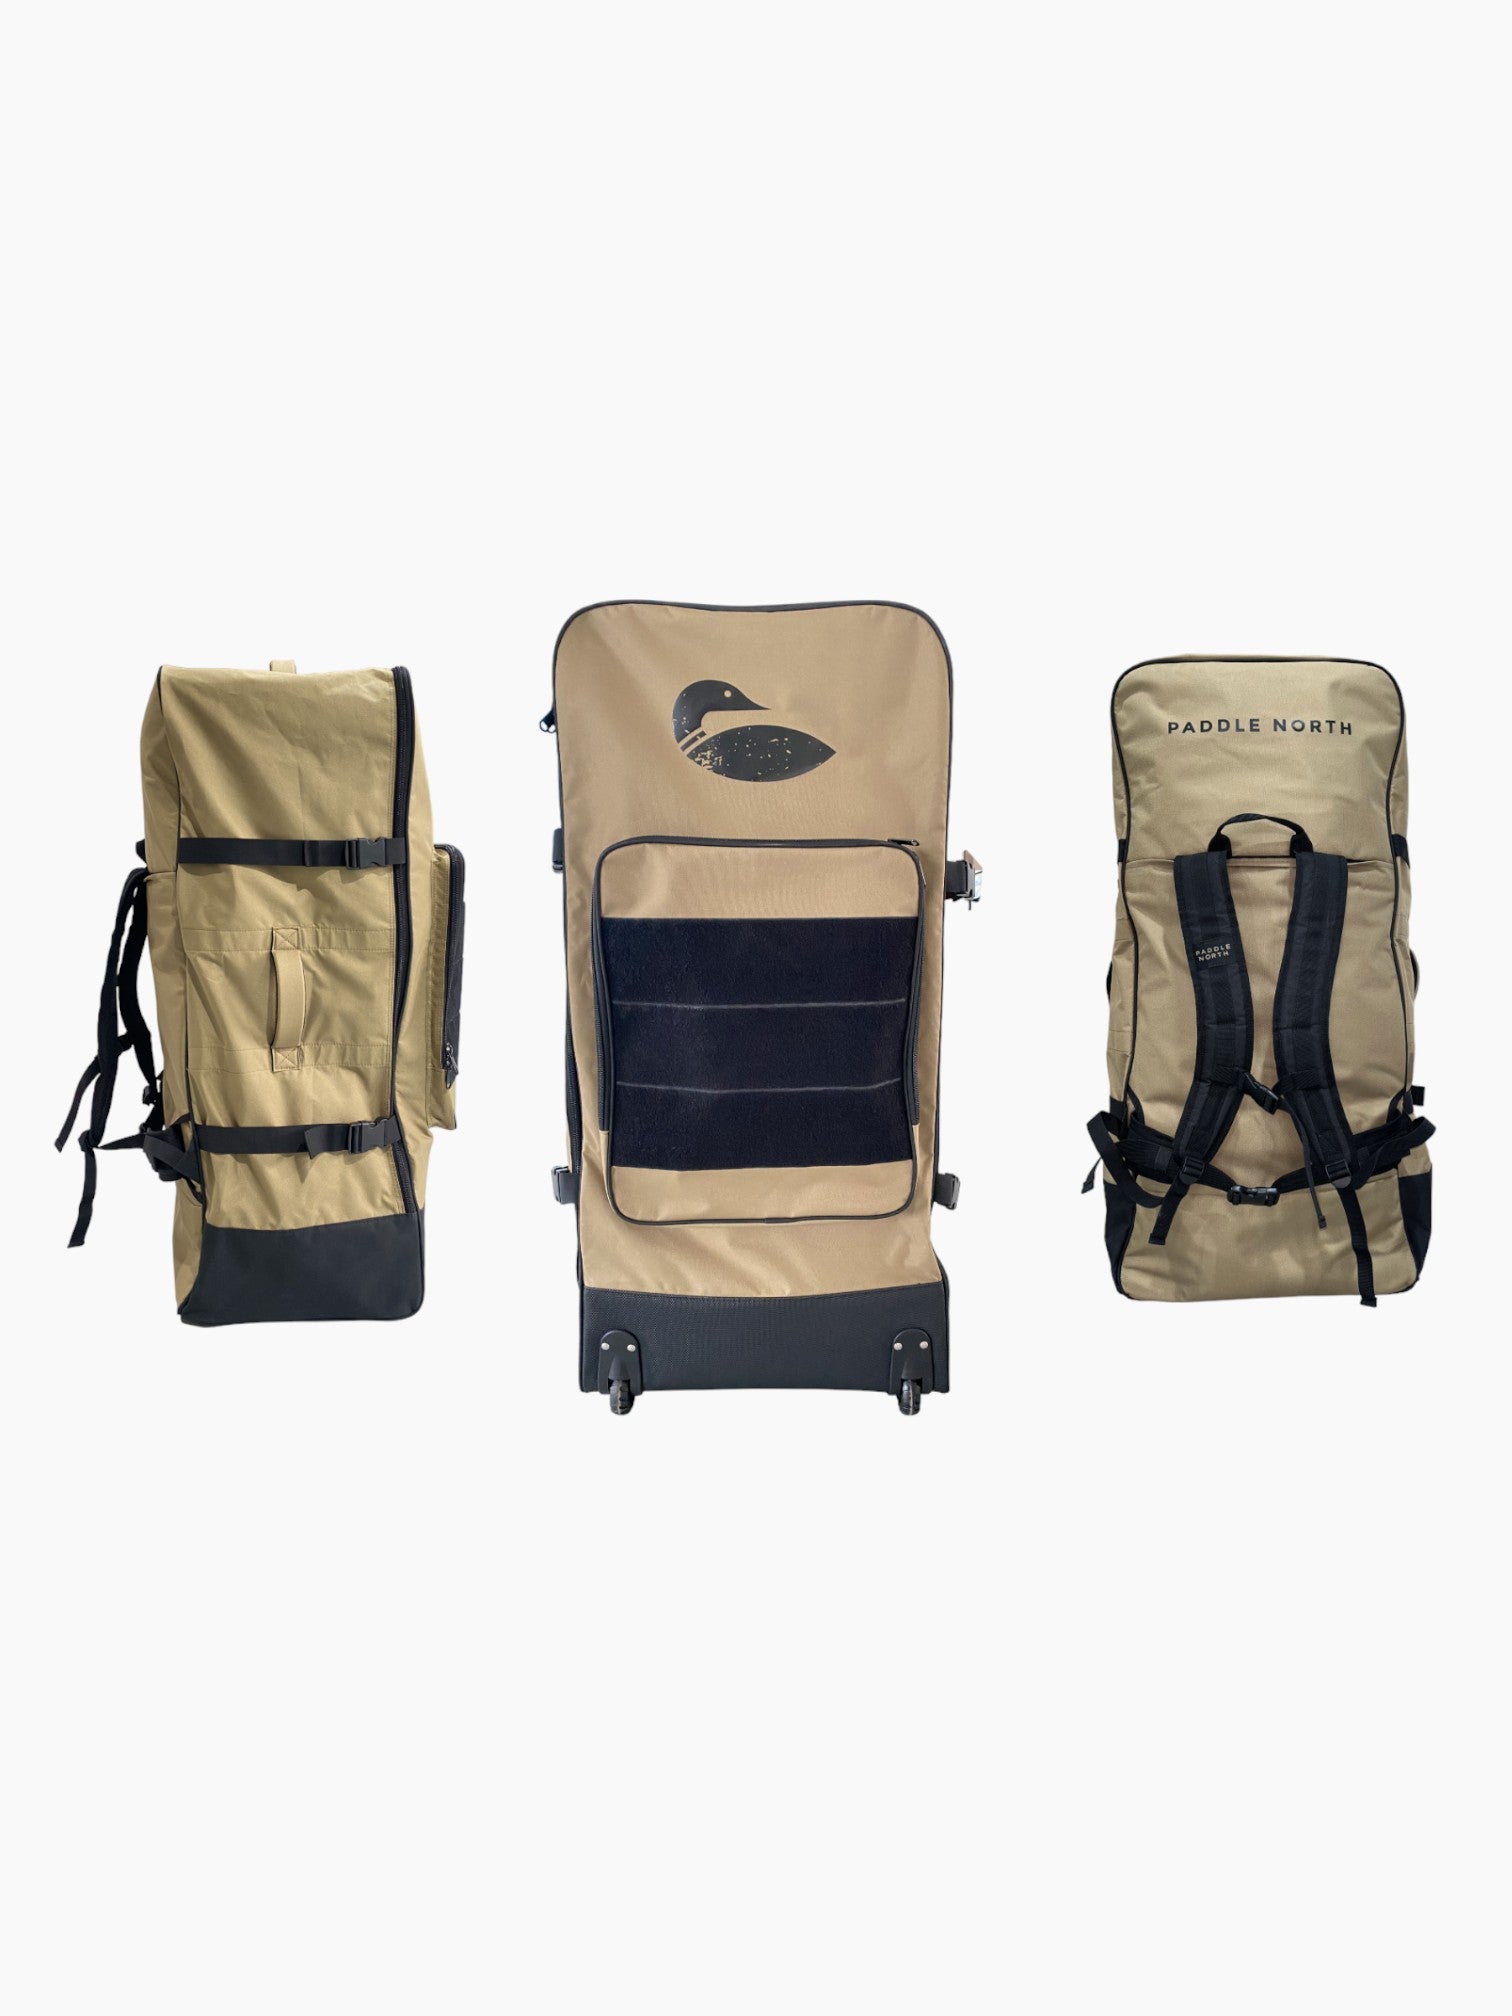 Kayak bag showing the side, front, and back.